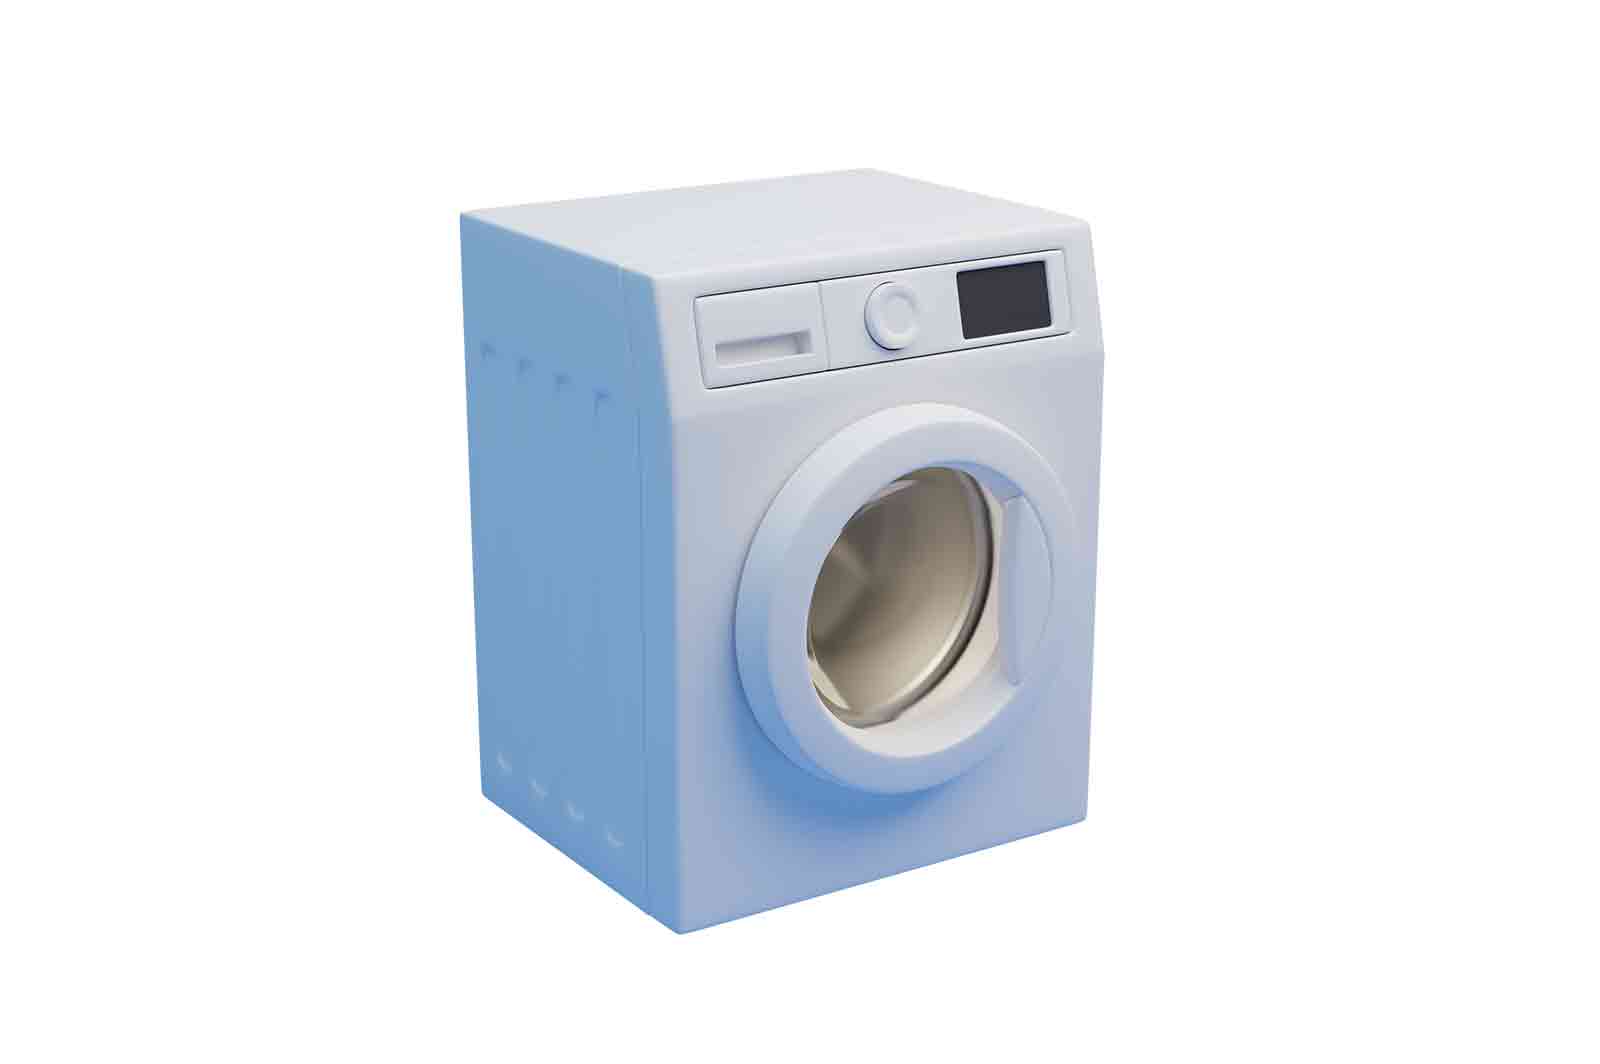 Modern washing machine 3d rendered illustration. Domestic electronic device. Household appliances for cleaning laundry at home